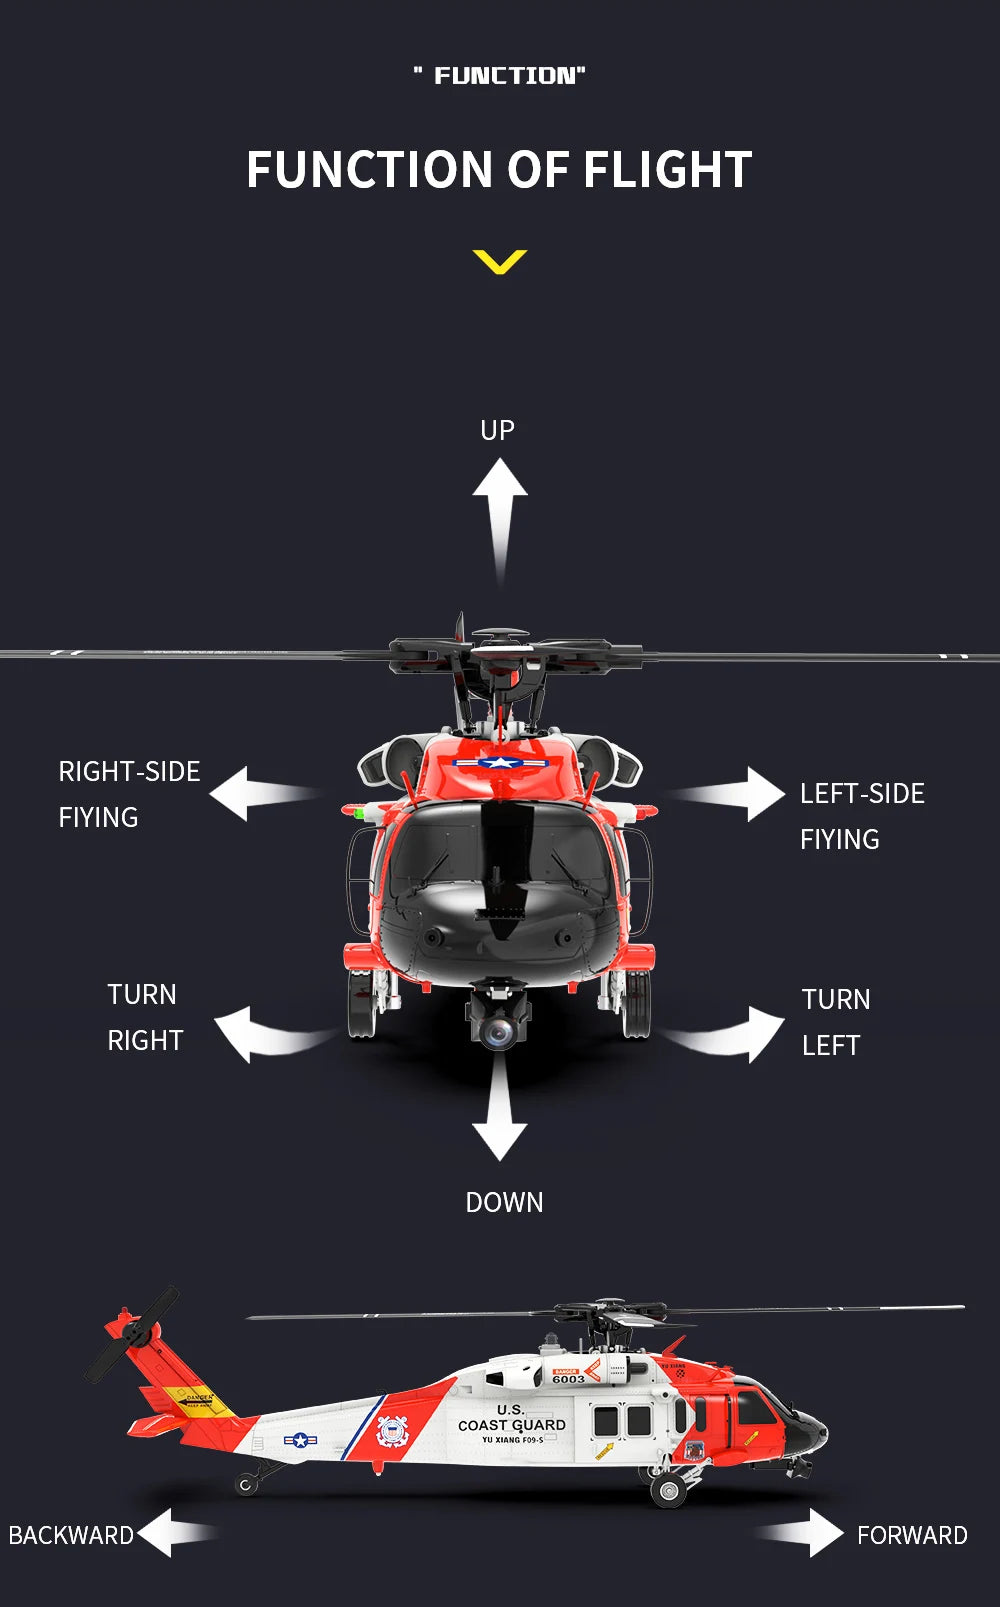 YXZNRC F09-S Flybarless RC Helicopter, FVNCTION" FUNCTION OF FLIGHT UP RIGHT-SIDE LE